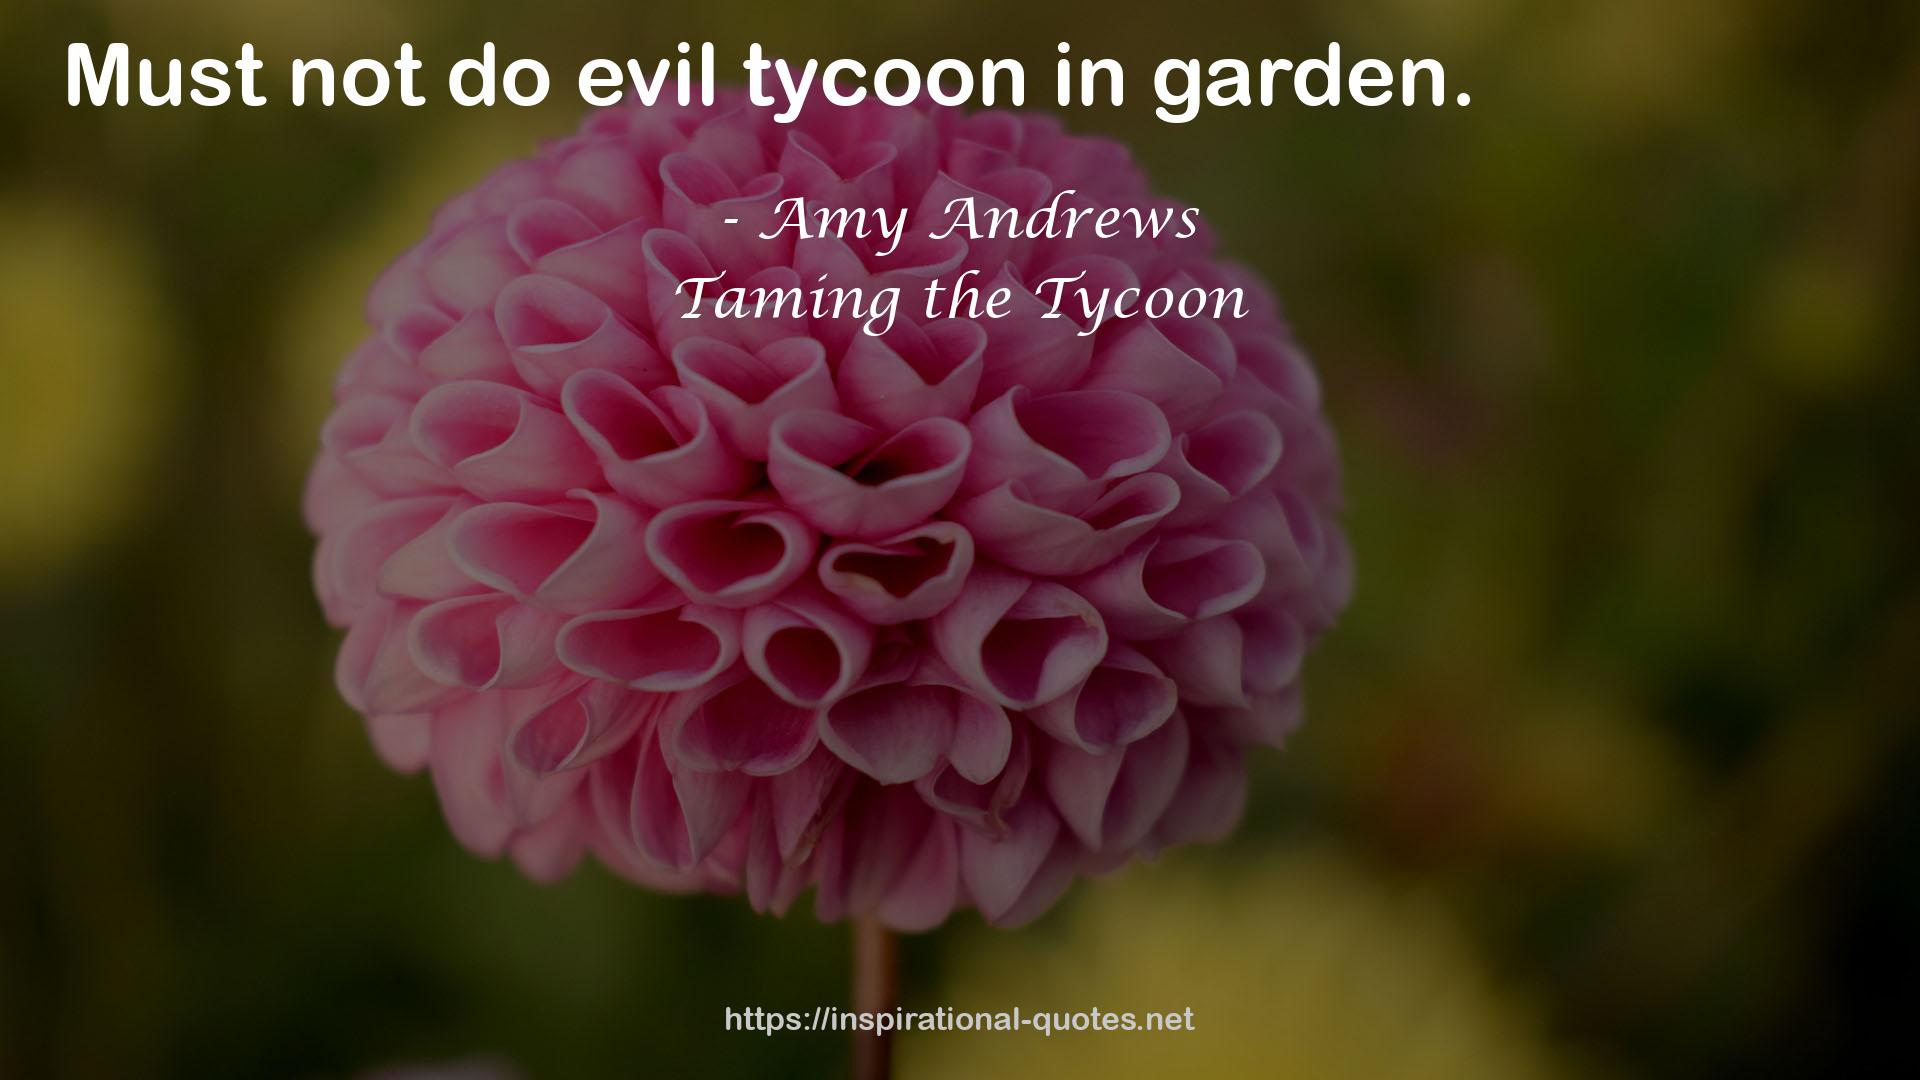 Taming the Tycoon QUOTES